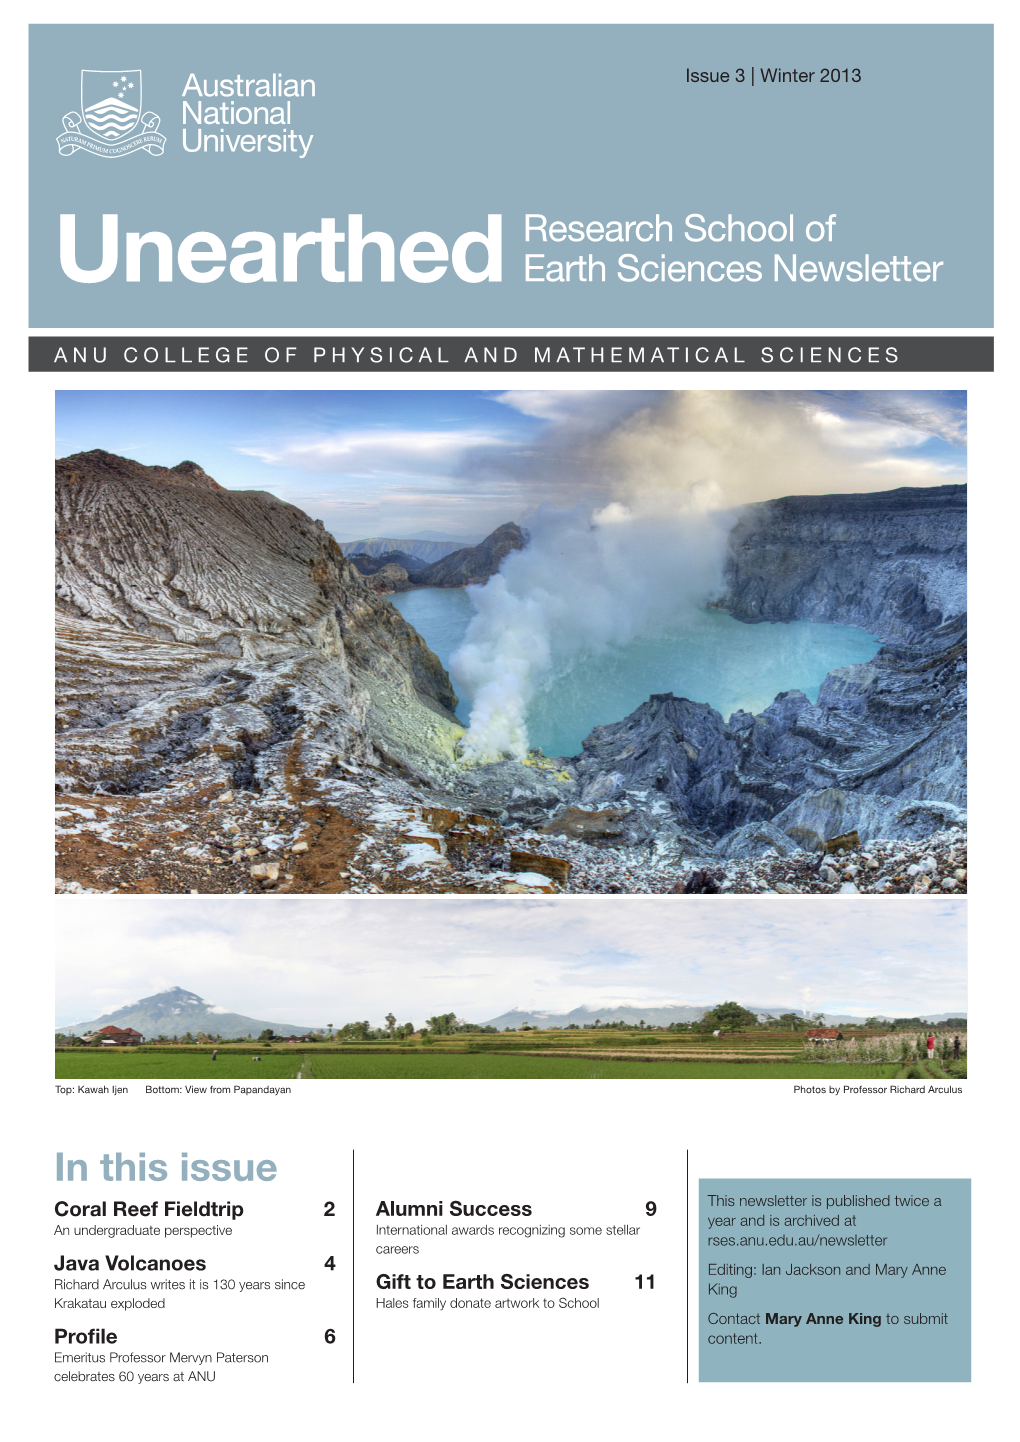 Unearthed Earth Sciences Newsletter